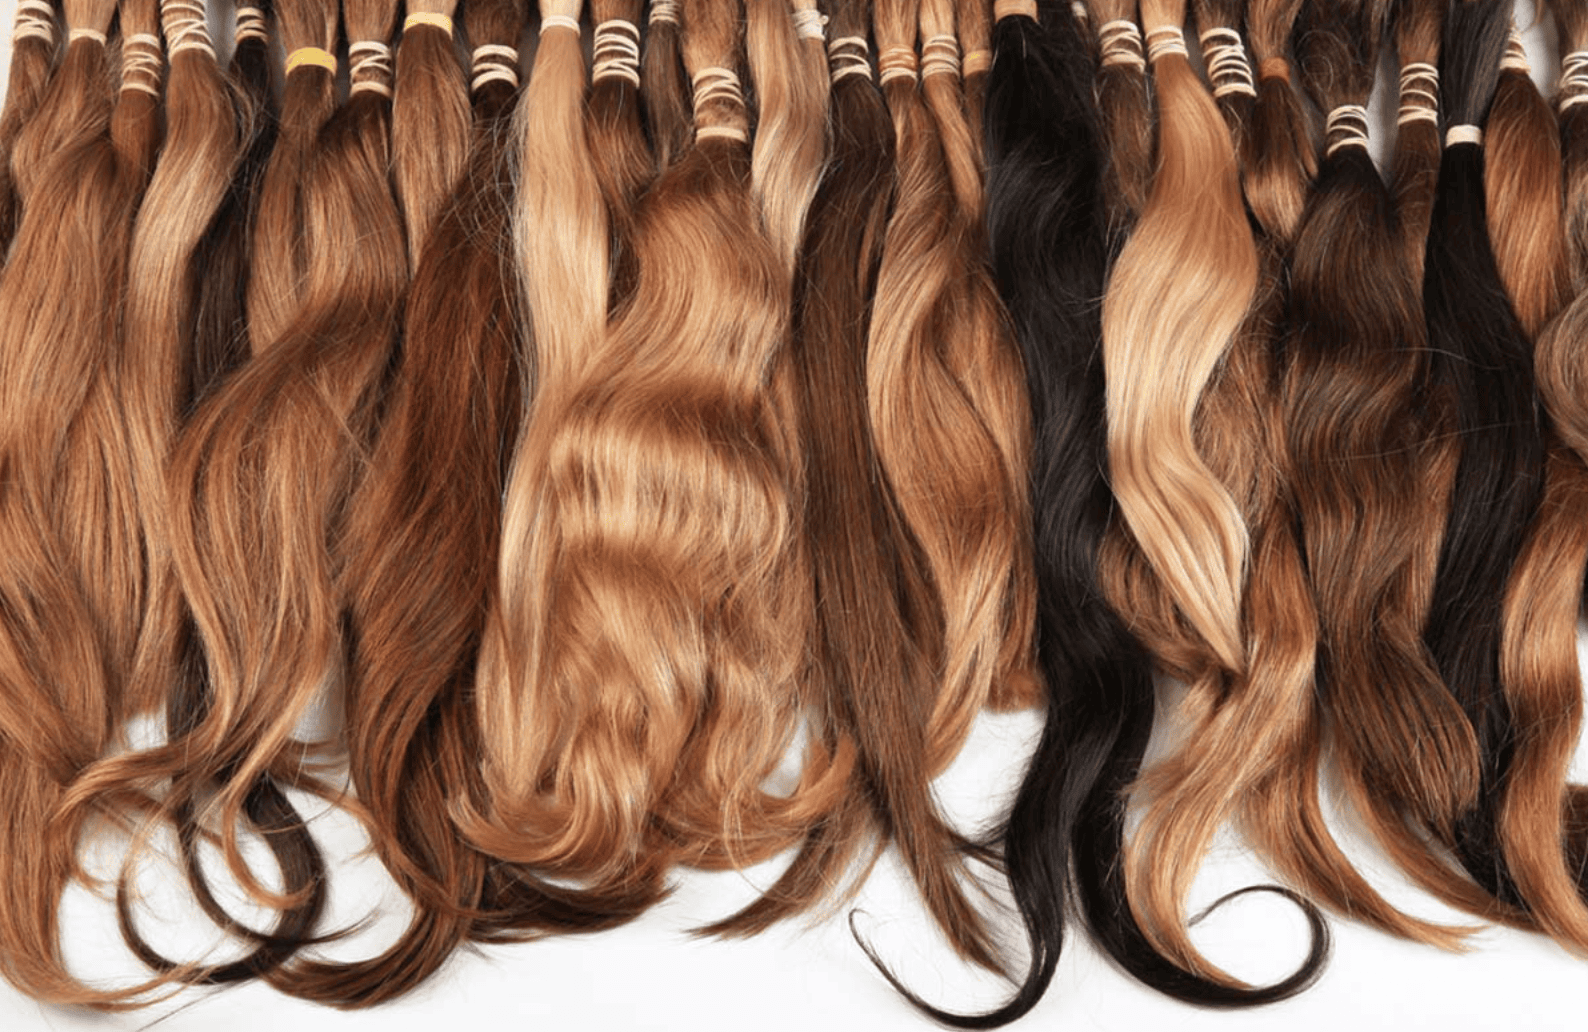 Types of Hair Extensions Explained: Expert Guide